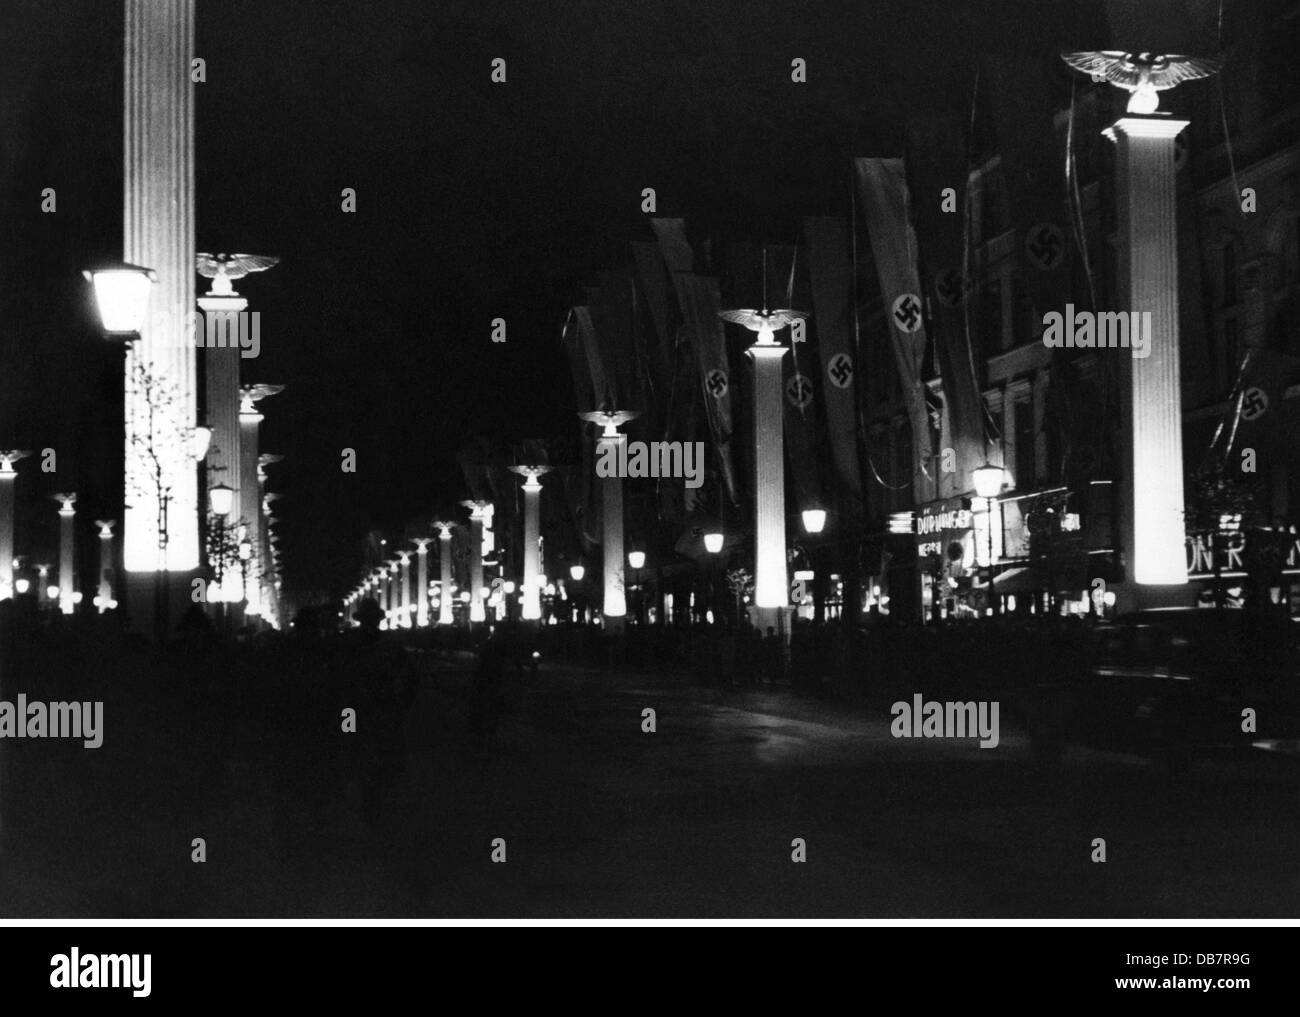 Nazism / National Socialism, propaganda, opening of the new East-West city axis, Berlin, on the occasion of of the 50th birthday of Adolf Hitler, 20.4.1939, illuminated pillars, Additional-Rights-Clearences-Not Available Stock Photo